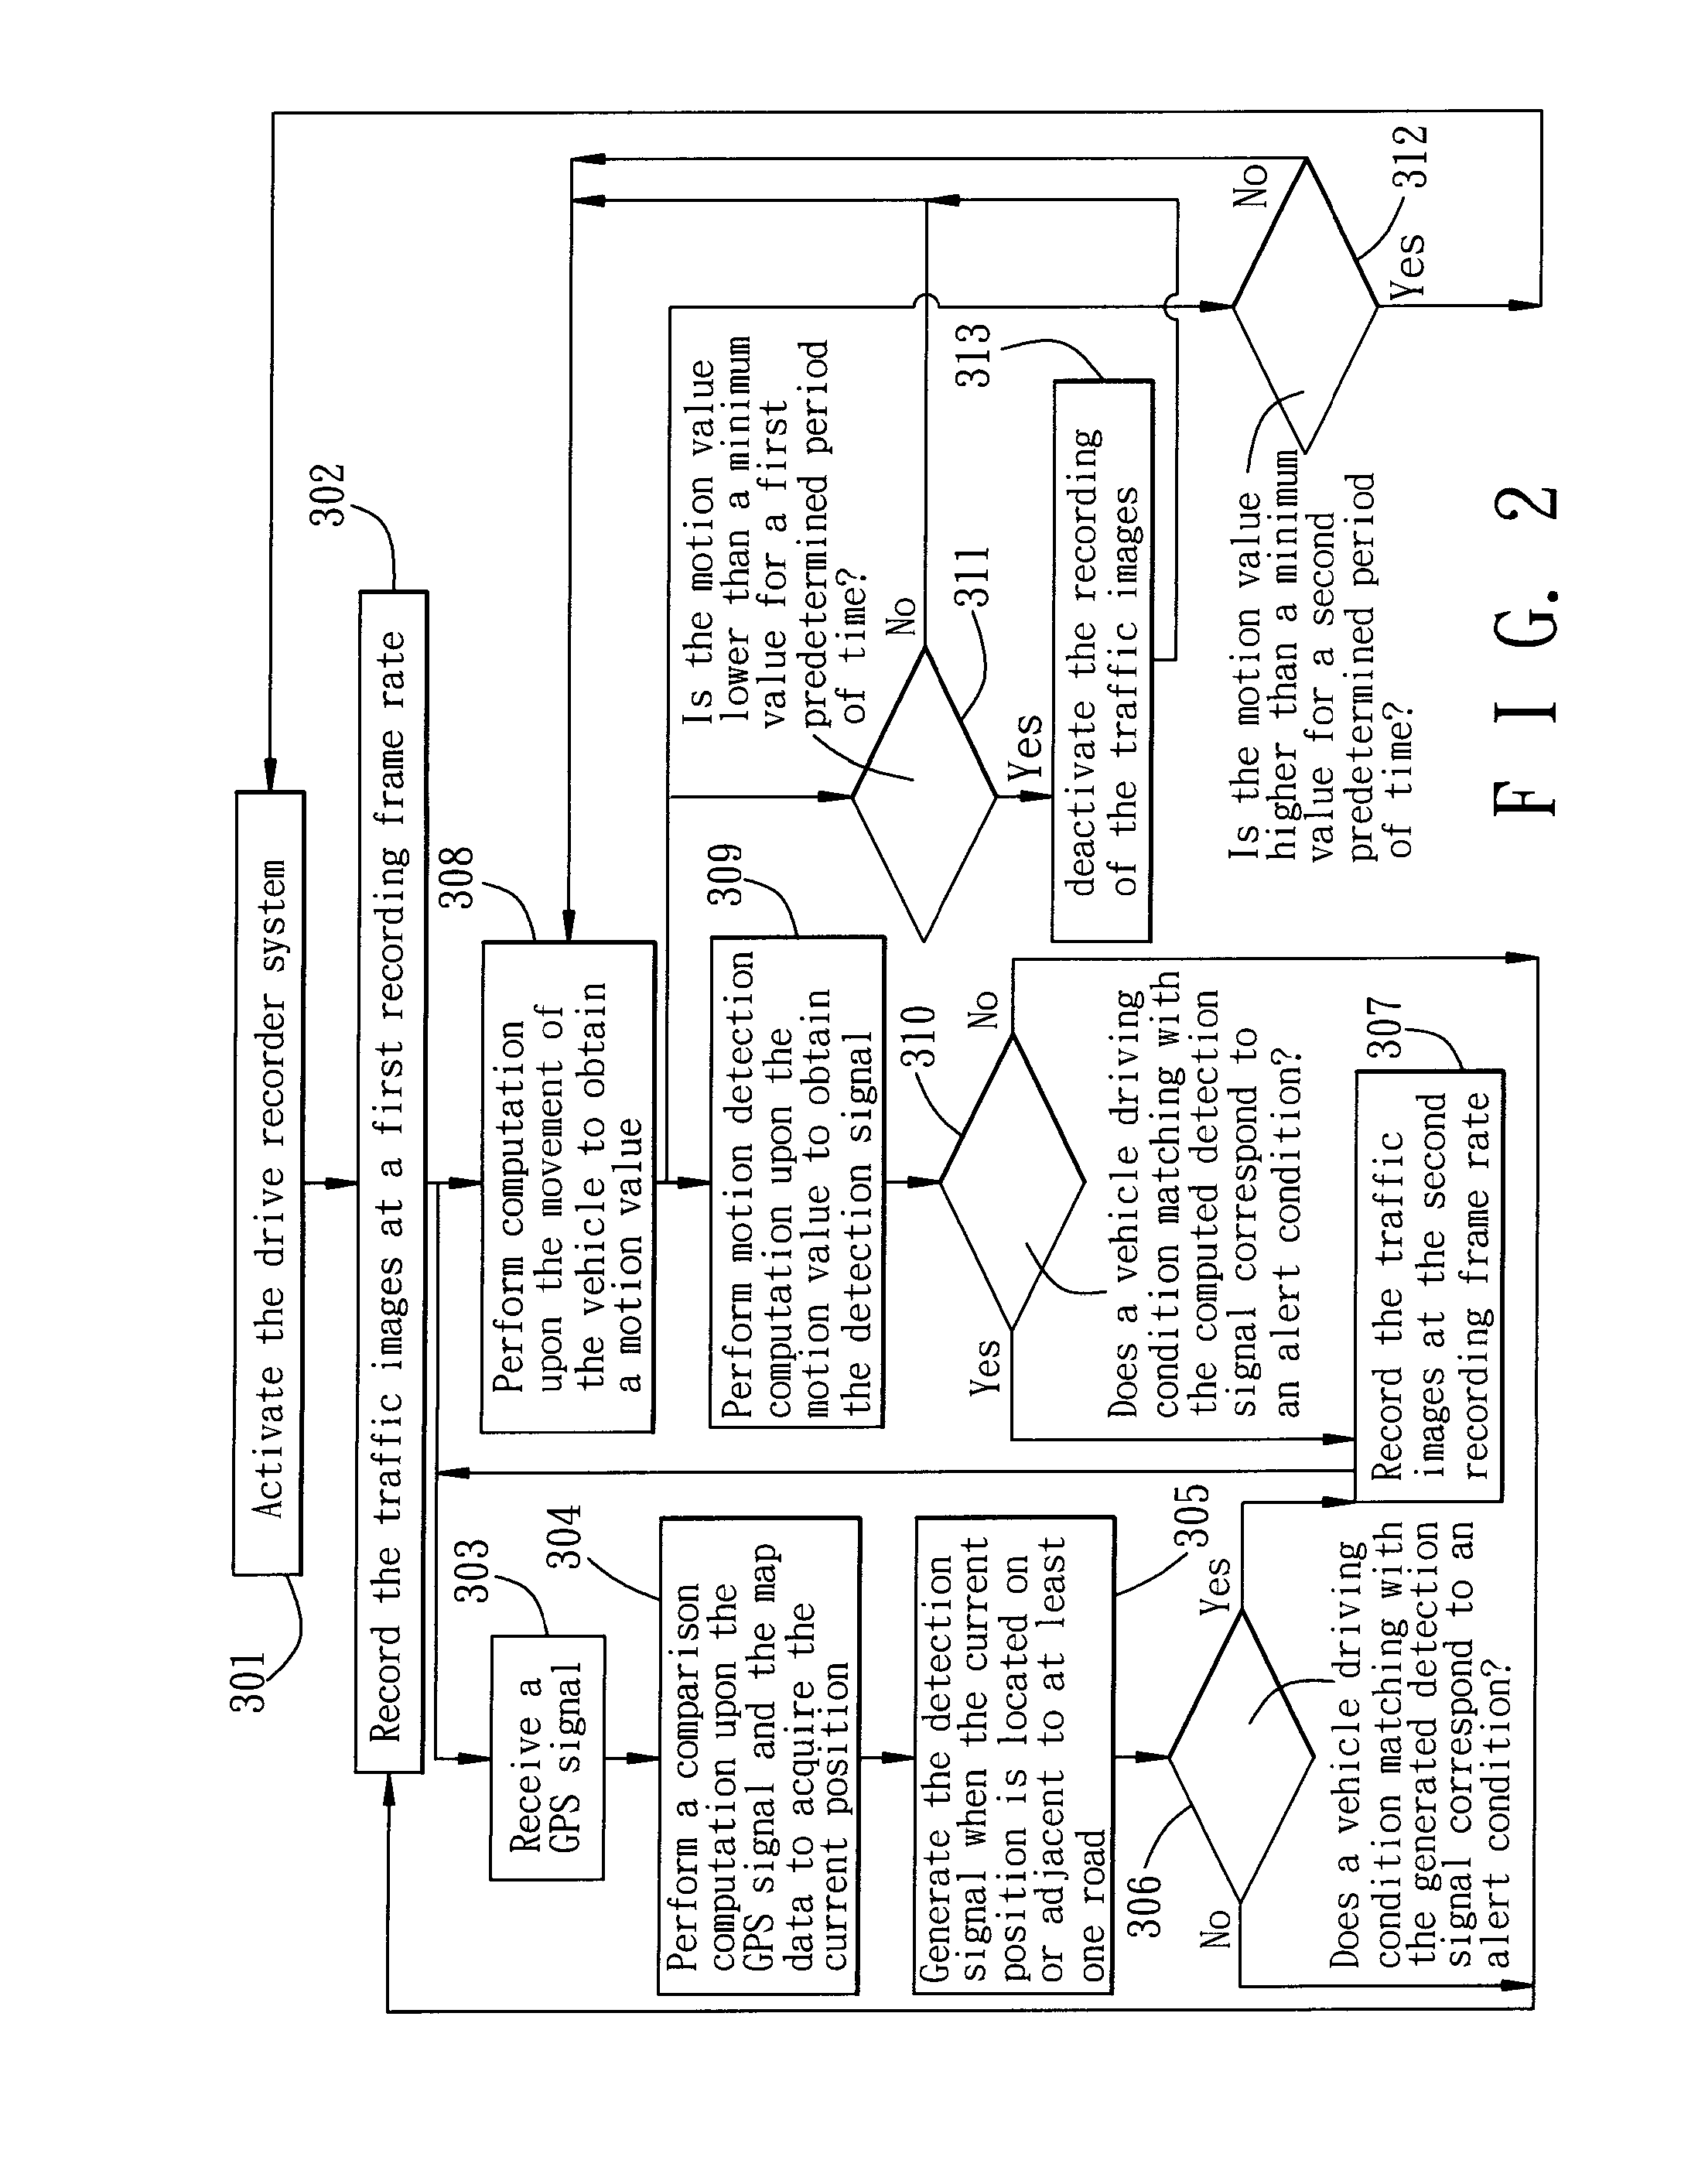 Method of recording traffic images and a drive recorder system